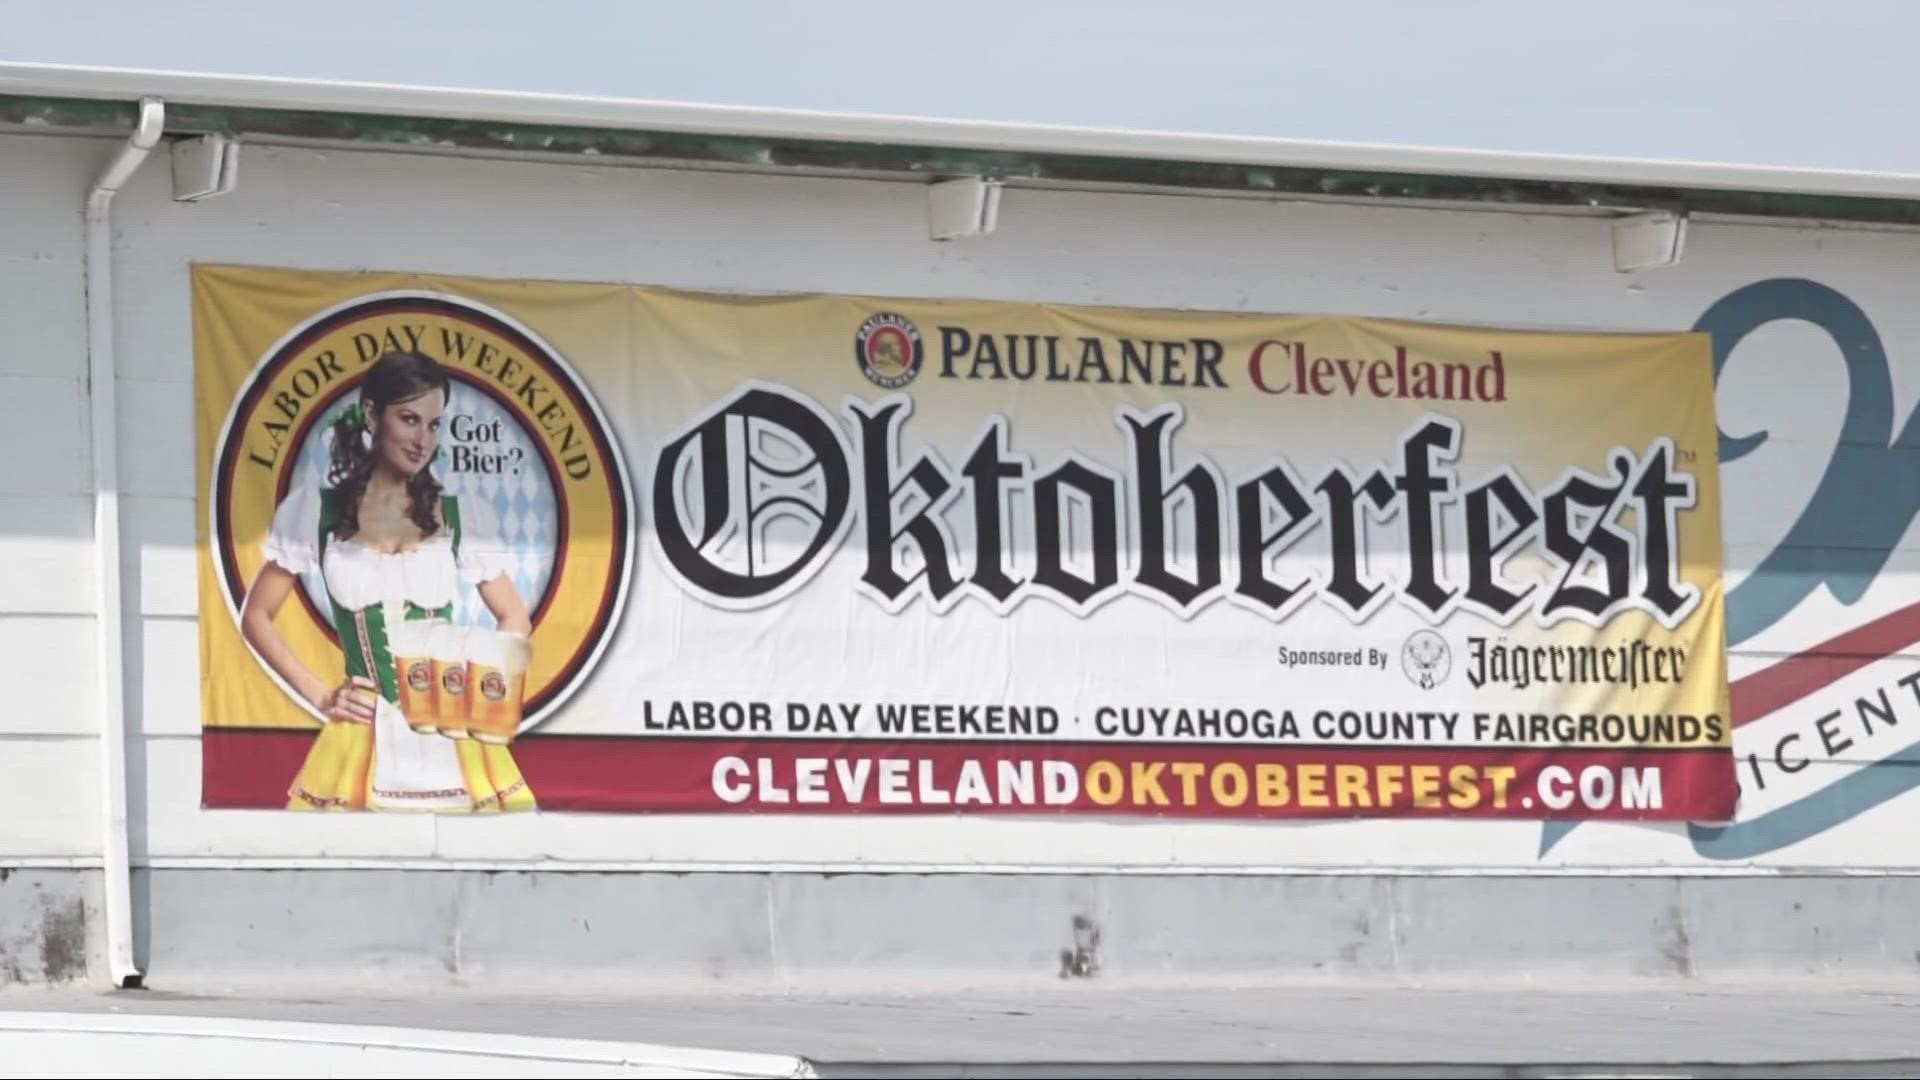 Get out and explore all that Northeast Ohio has to offer this Labor Day Weekend!